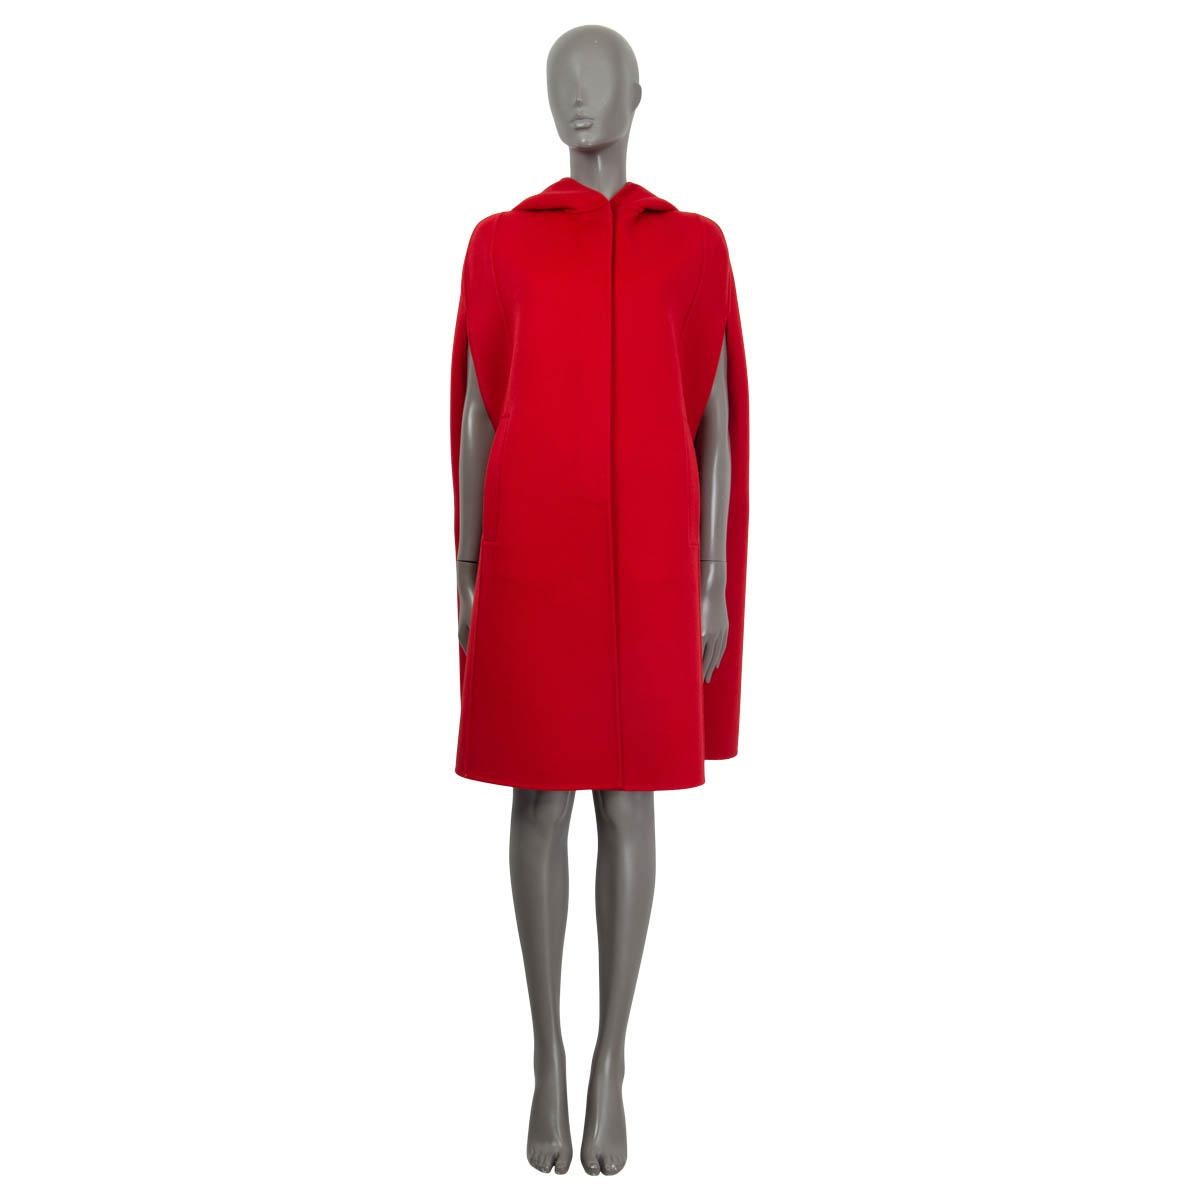 100% authentic Christian Dior Fall Winter 2021 hooded cape in red virgin wool (90%) and cashmere (10%). Features two slit pockets on the front. Unlined. Brand new, with tags.

Measurements
Model	DiorFW21
Tag Size	38
Size	S
Bust	114cm (44.5in) to